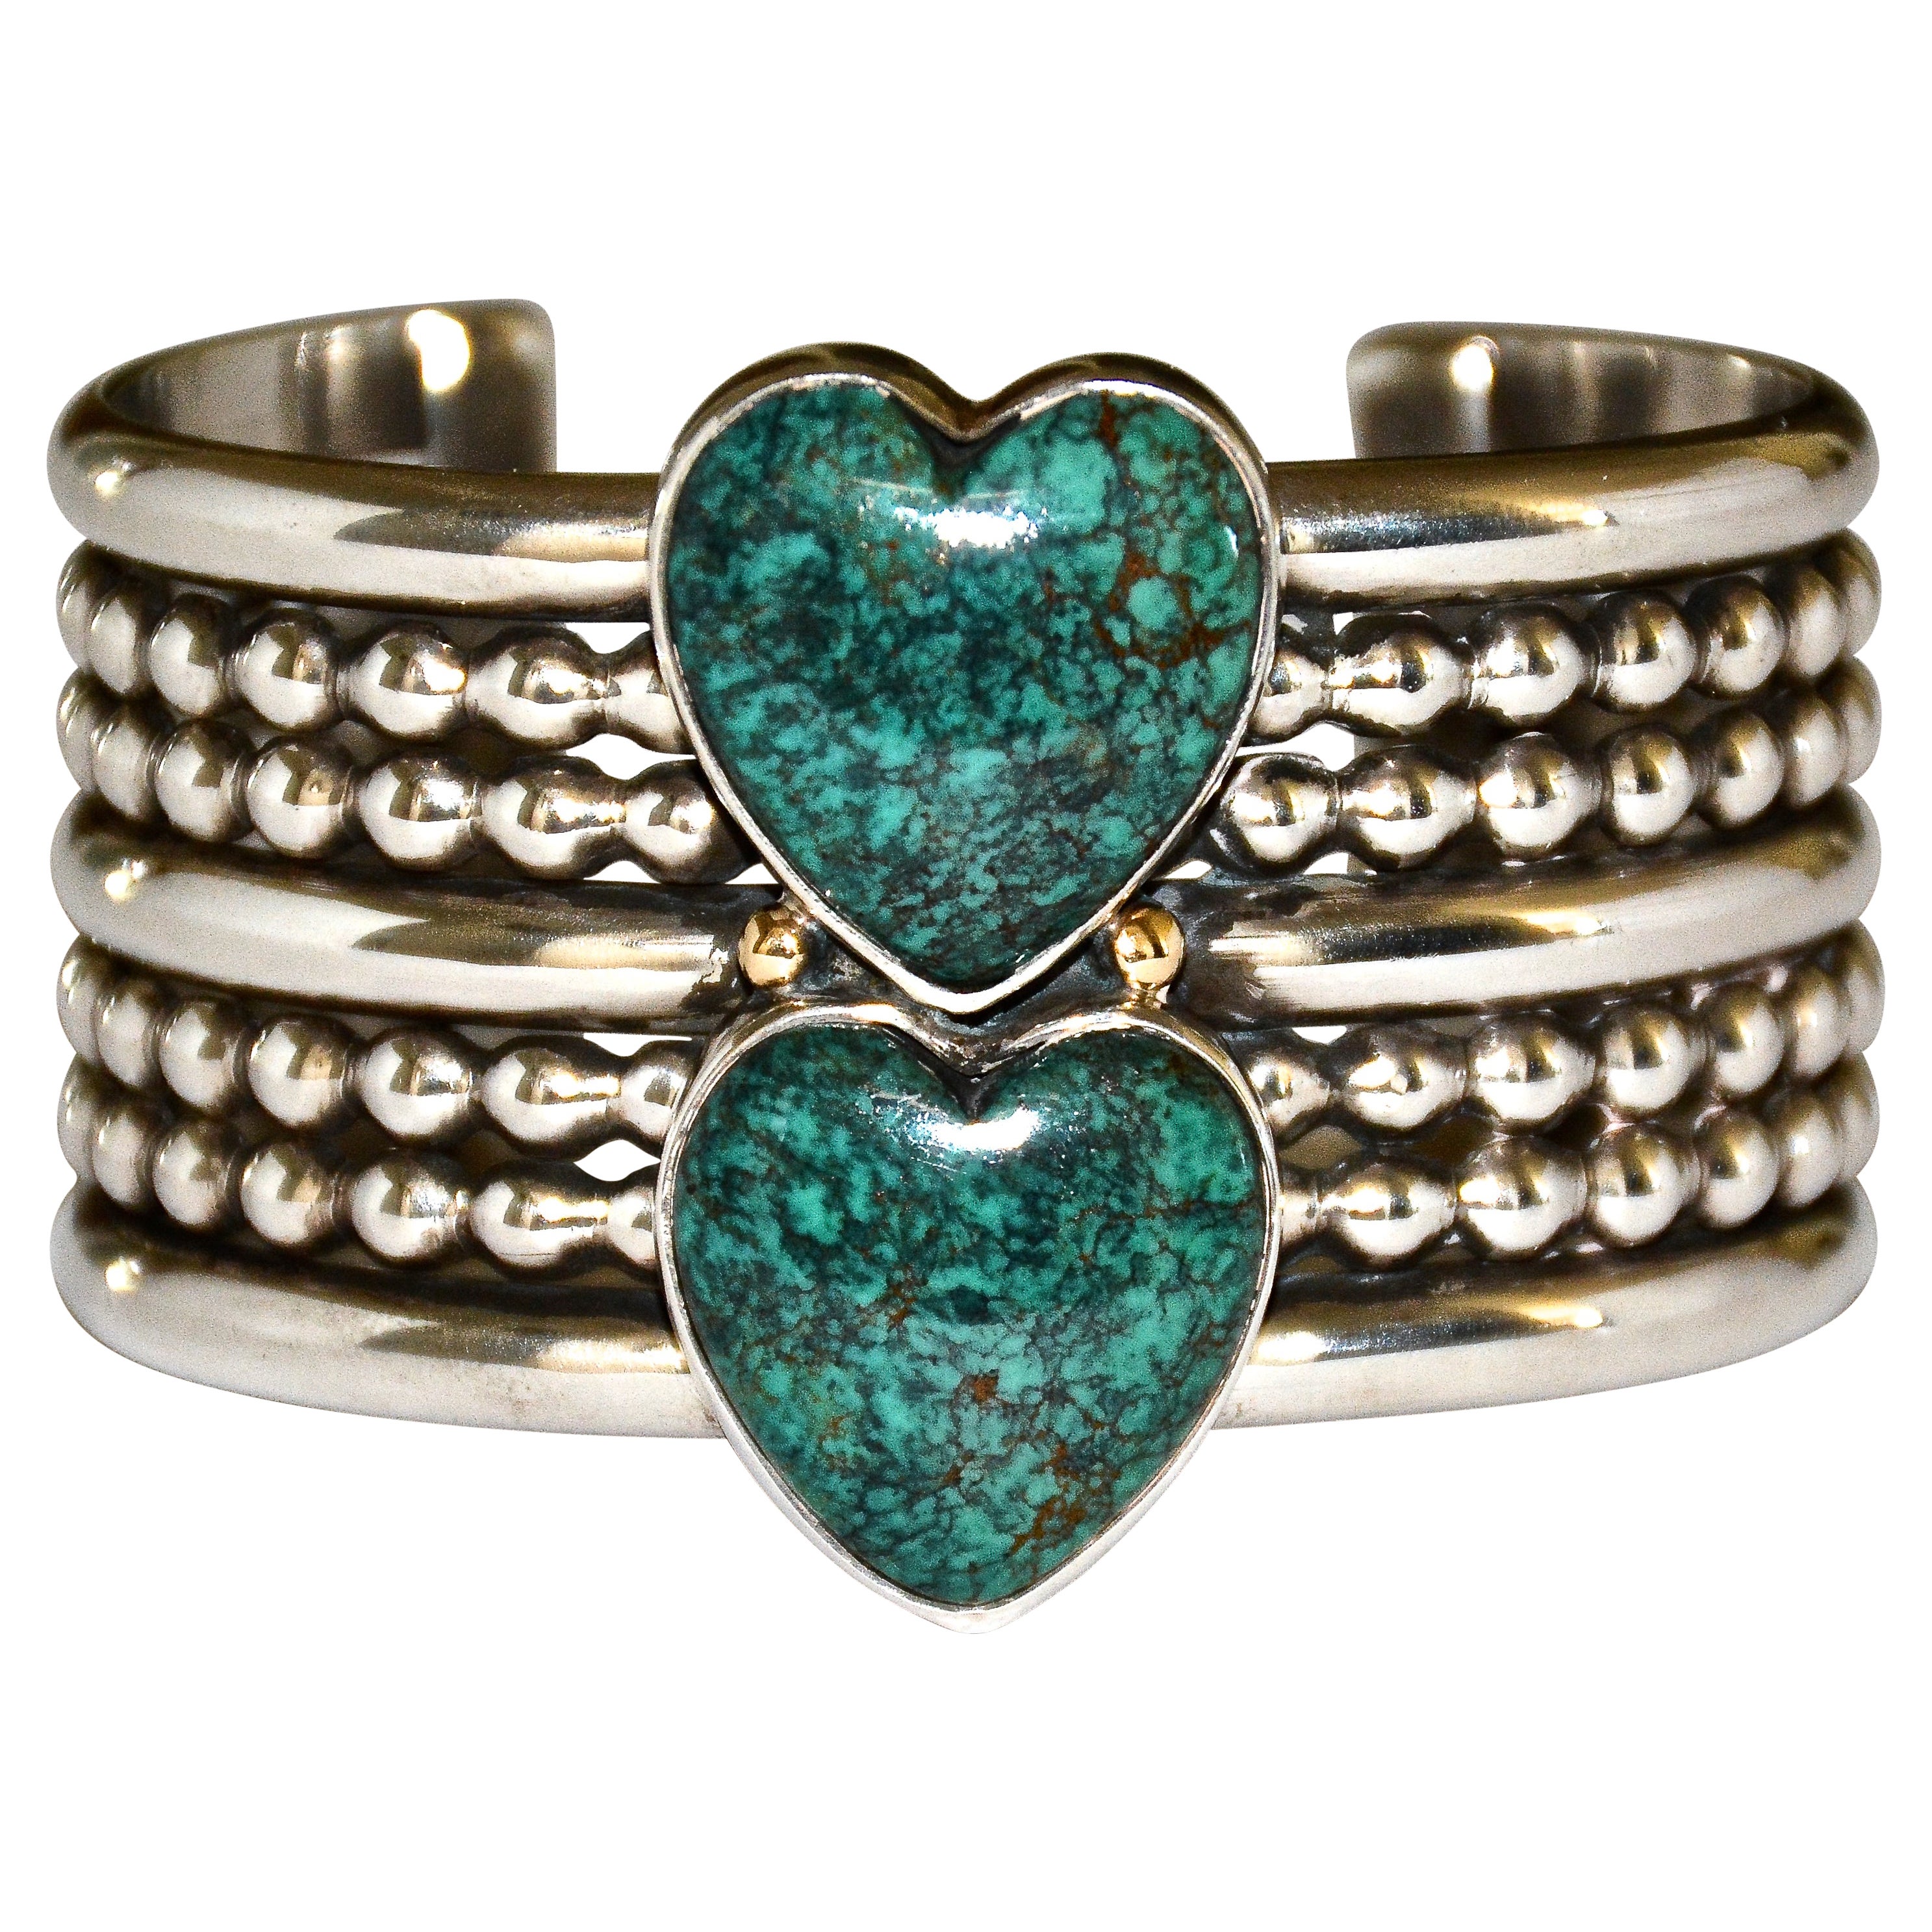 Mike Bird-Romero Sterling Silver Cuff Bracelet W/ Large Turquoise Hearts, 1993  For Sale